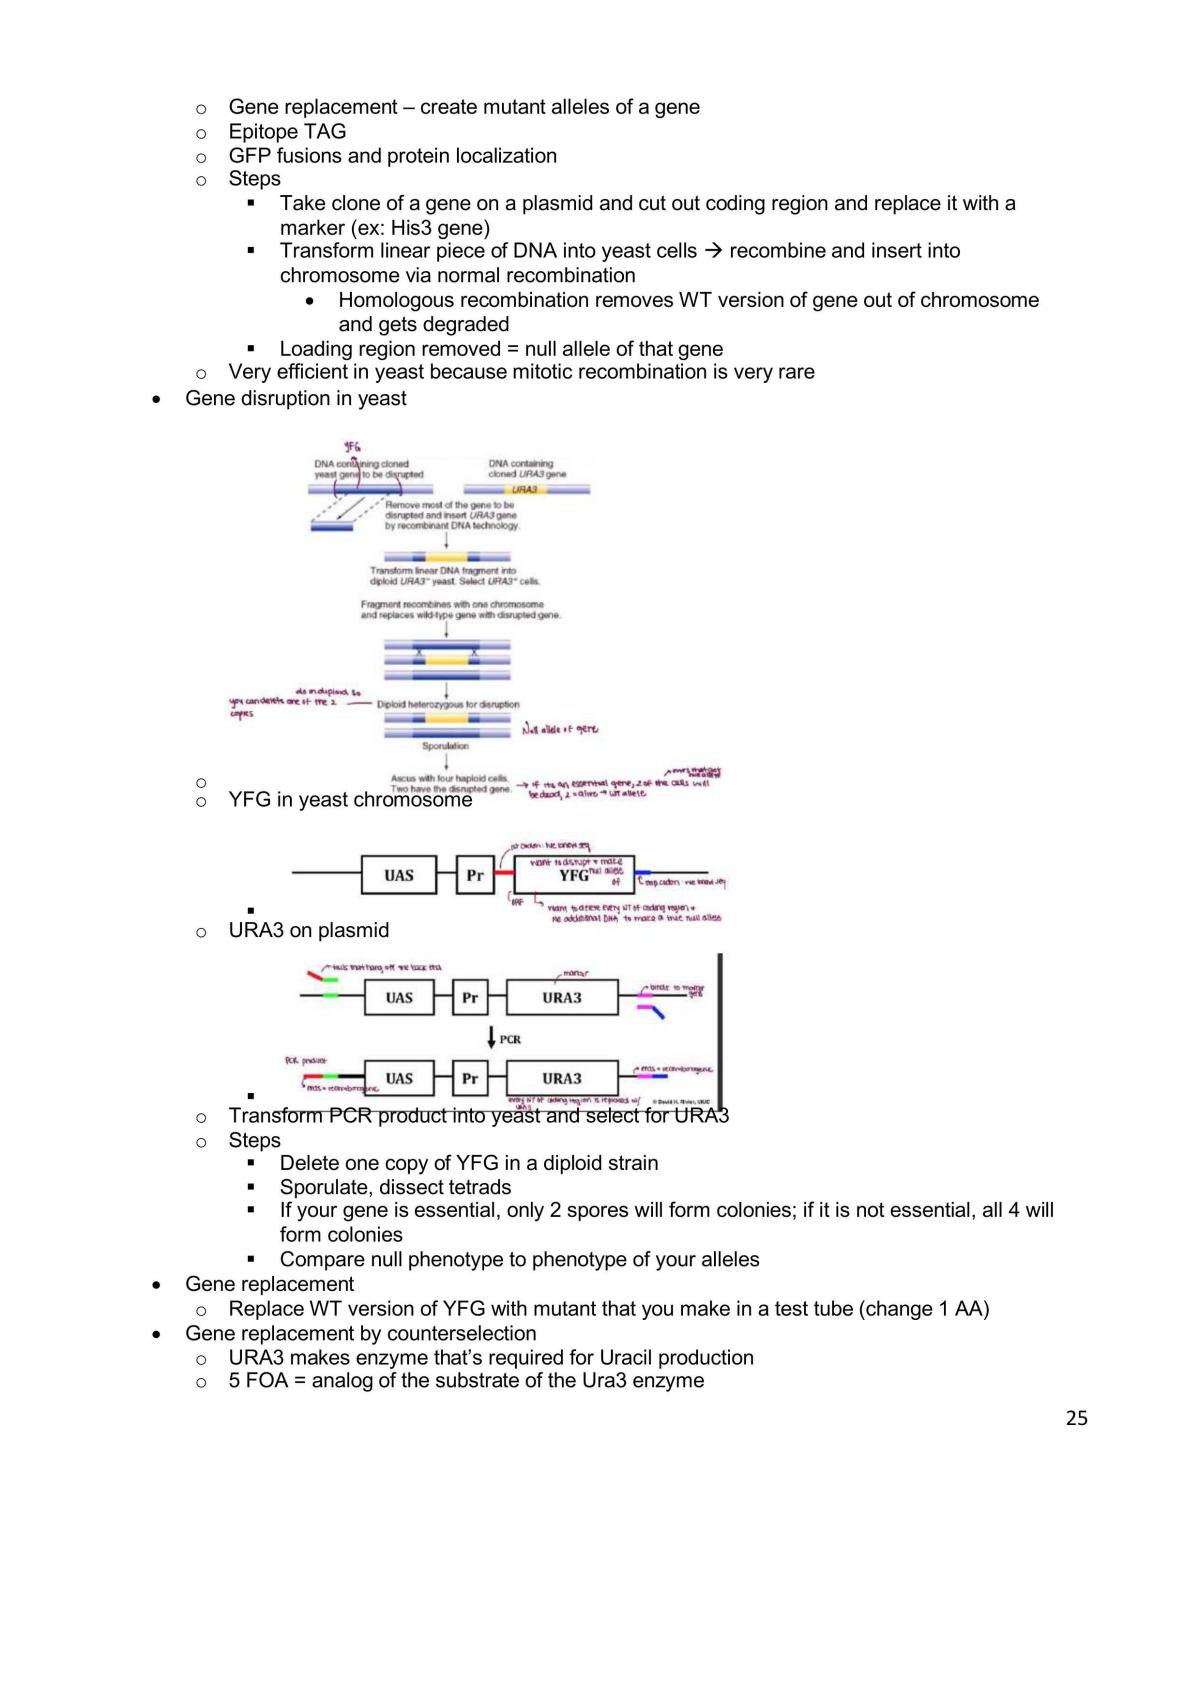 Genetics and Genomics Final Study Guide - Page 25